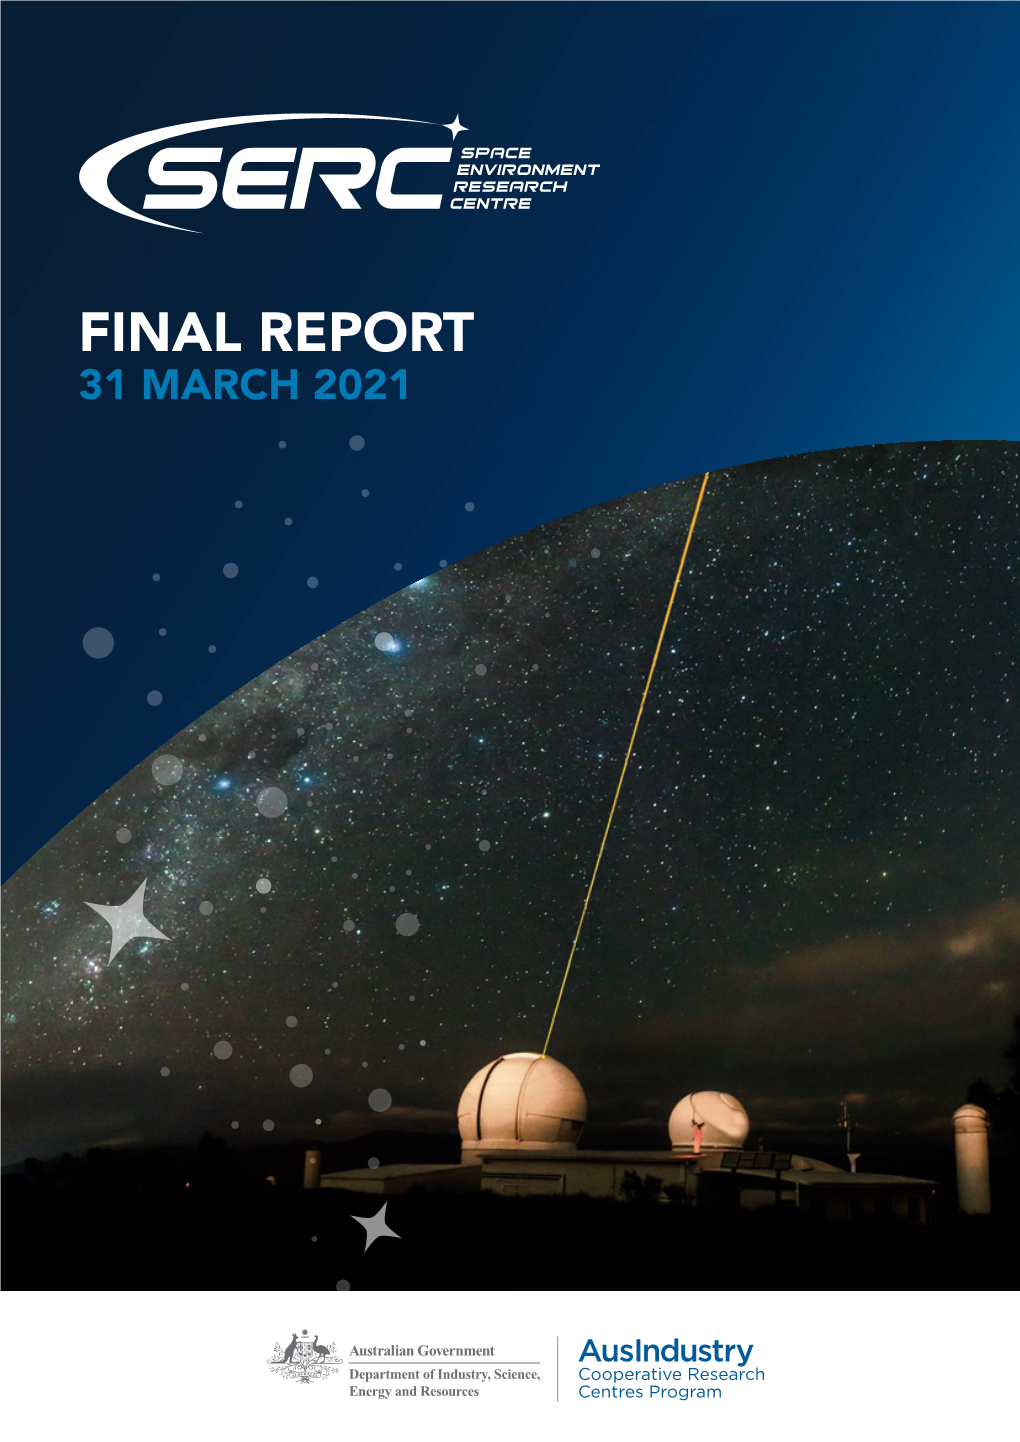 FINAL REPORT 31 MARCH 2021 the International Space Station Must Manoeuvre Away from a Possible Space Debris Collision 1 to 3 Times Per Year on Average